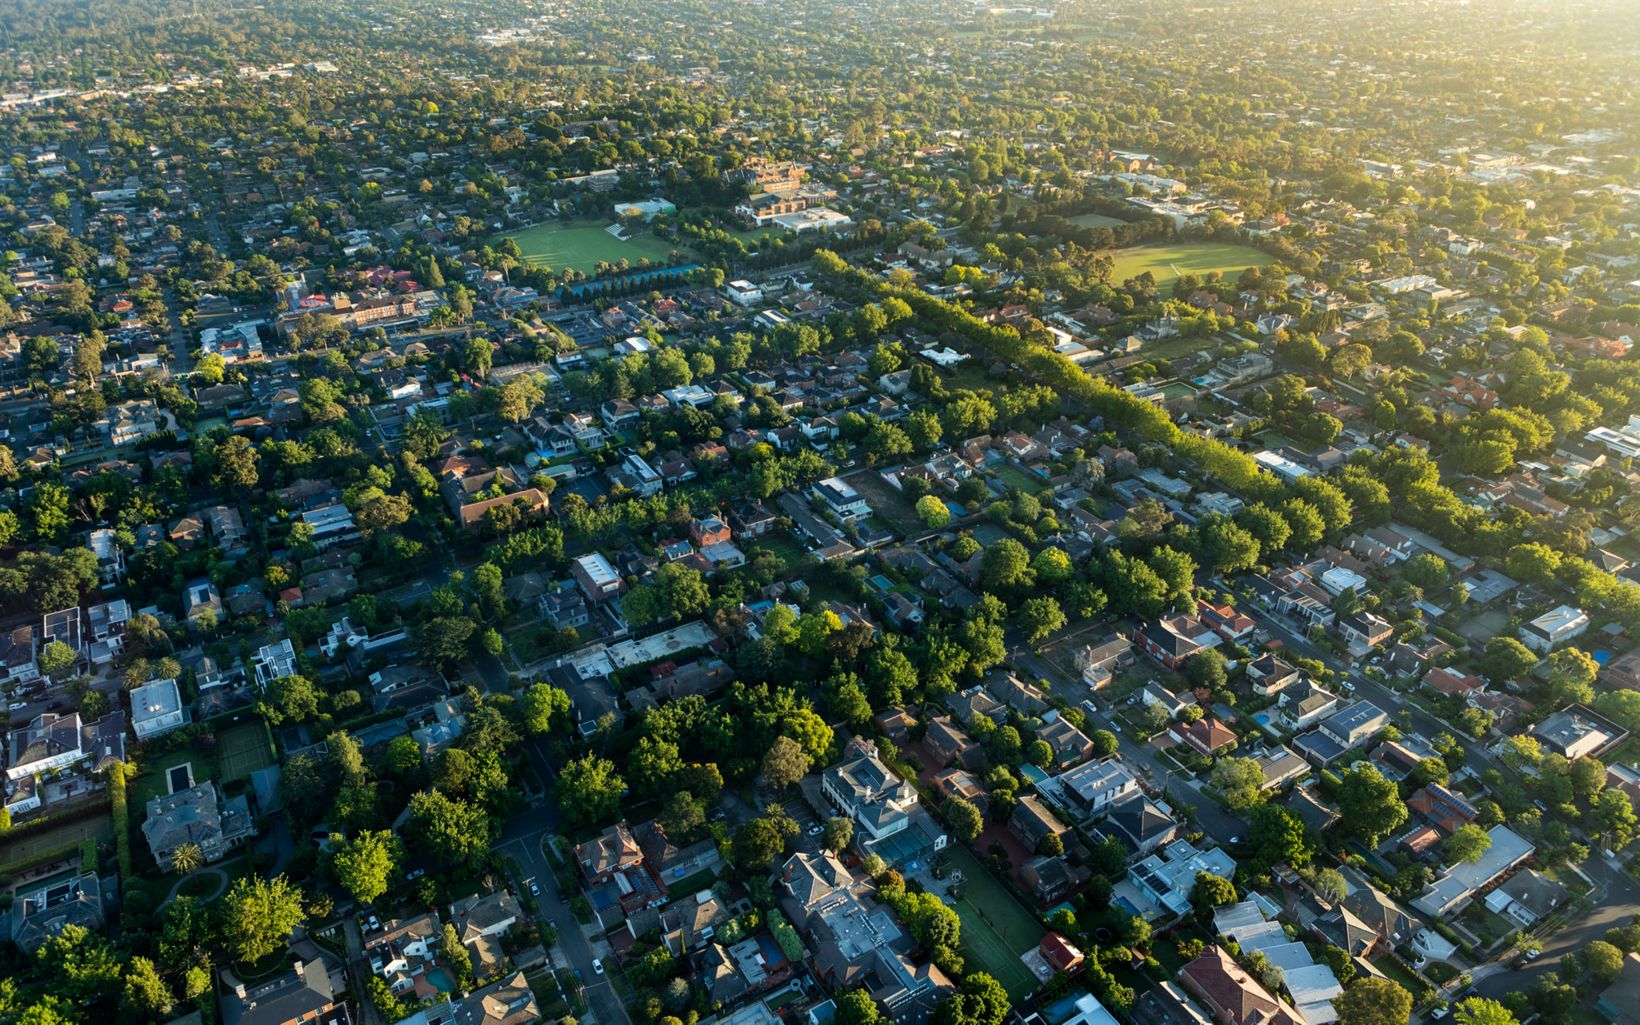 A suburb of Melbourne at sunrise.